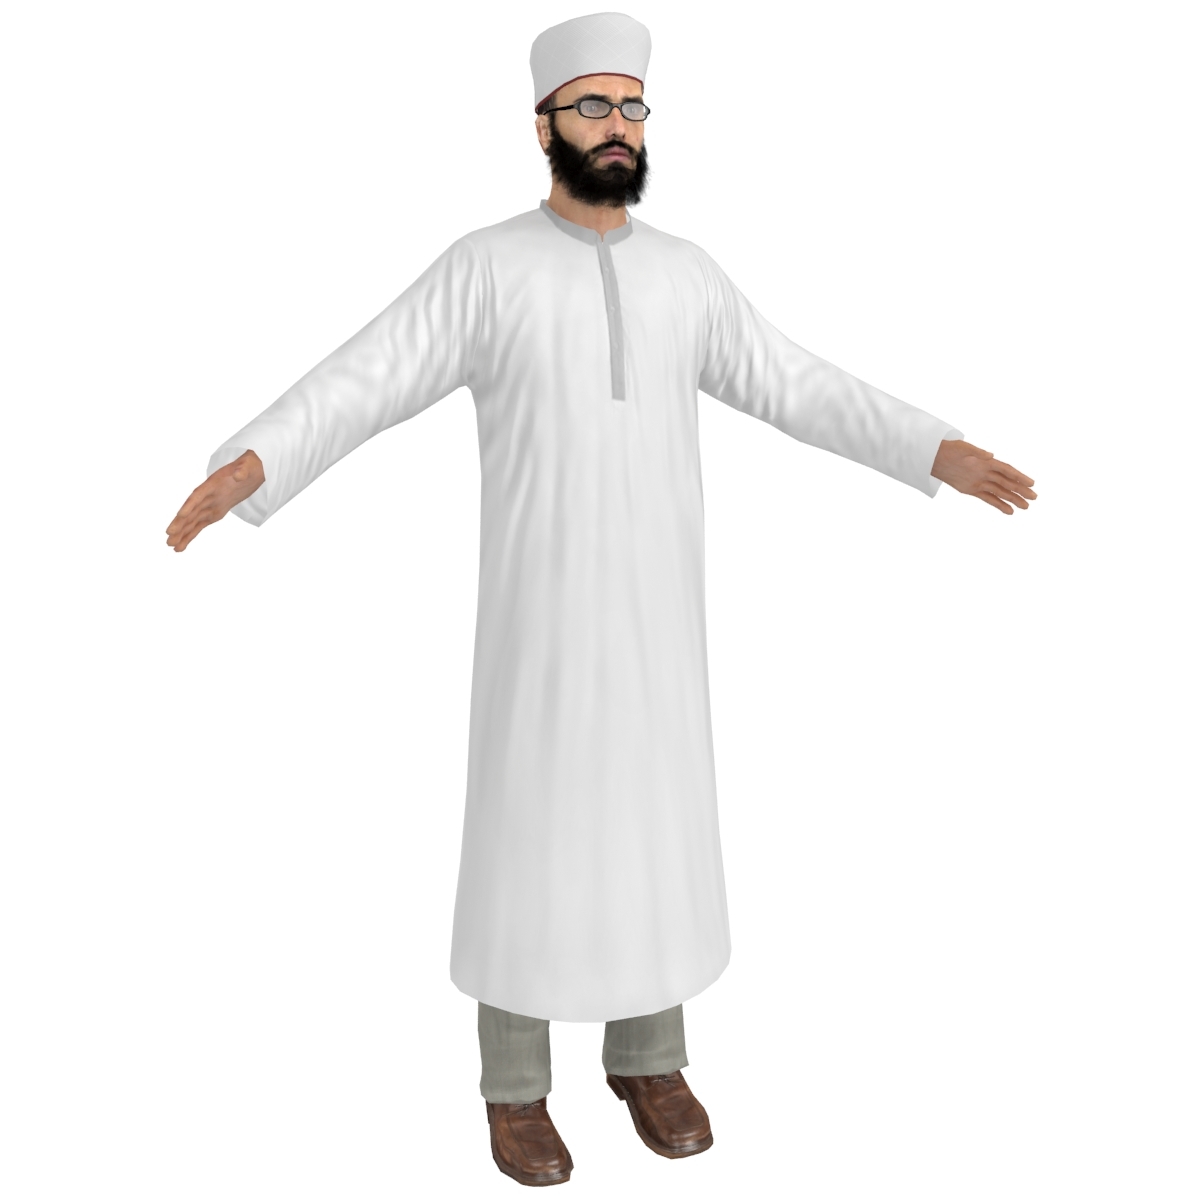 Free 3d Max Model Priest - Generator For Robux No Verification Or Survey